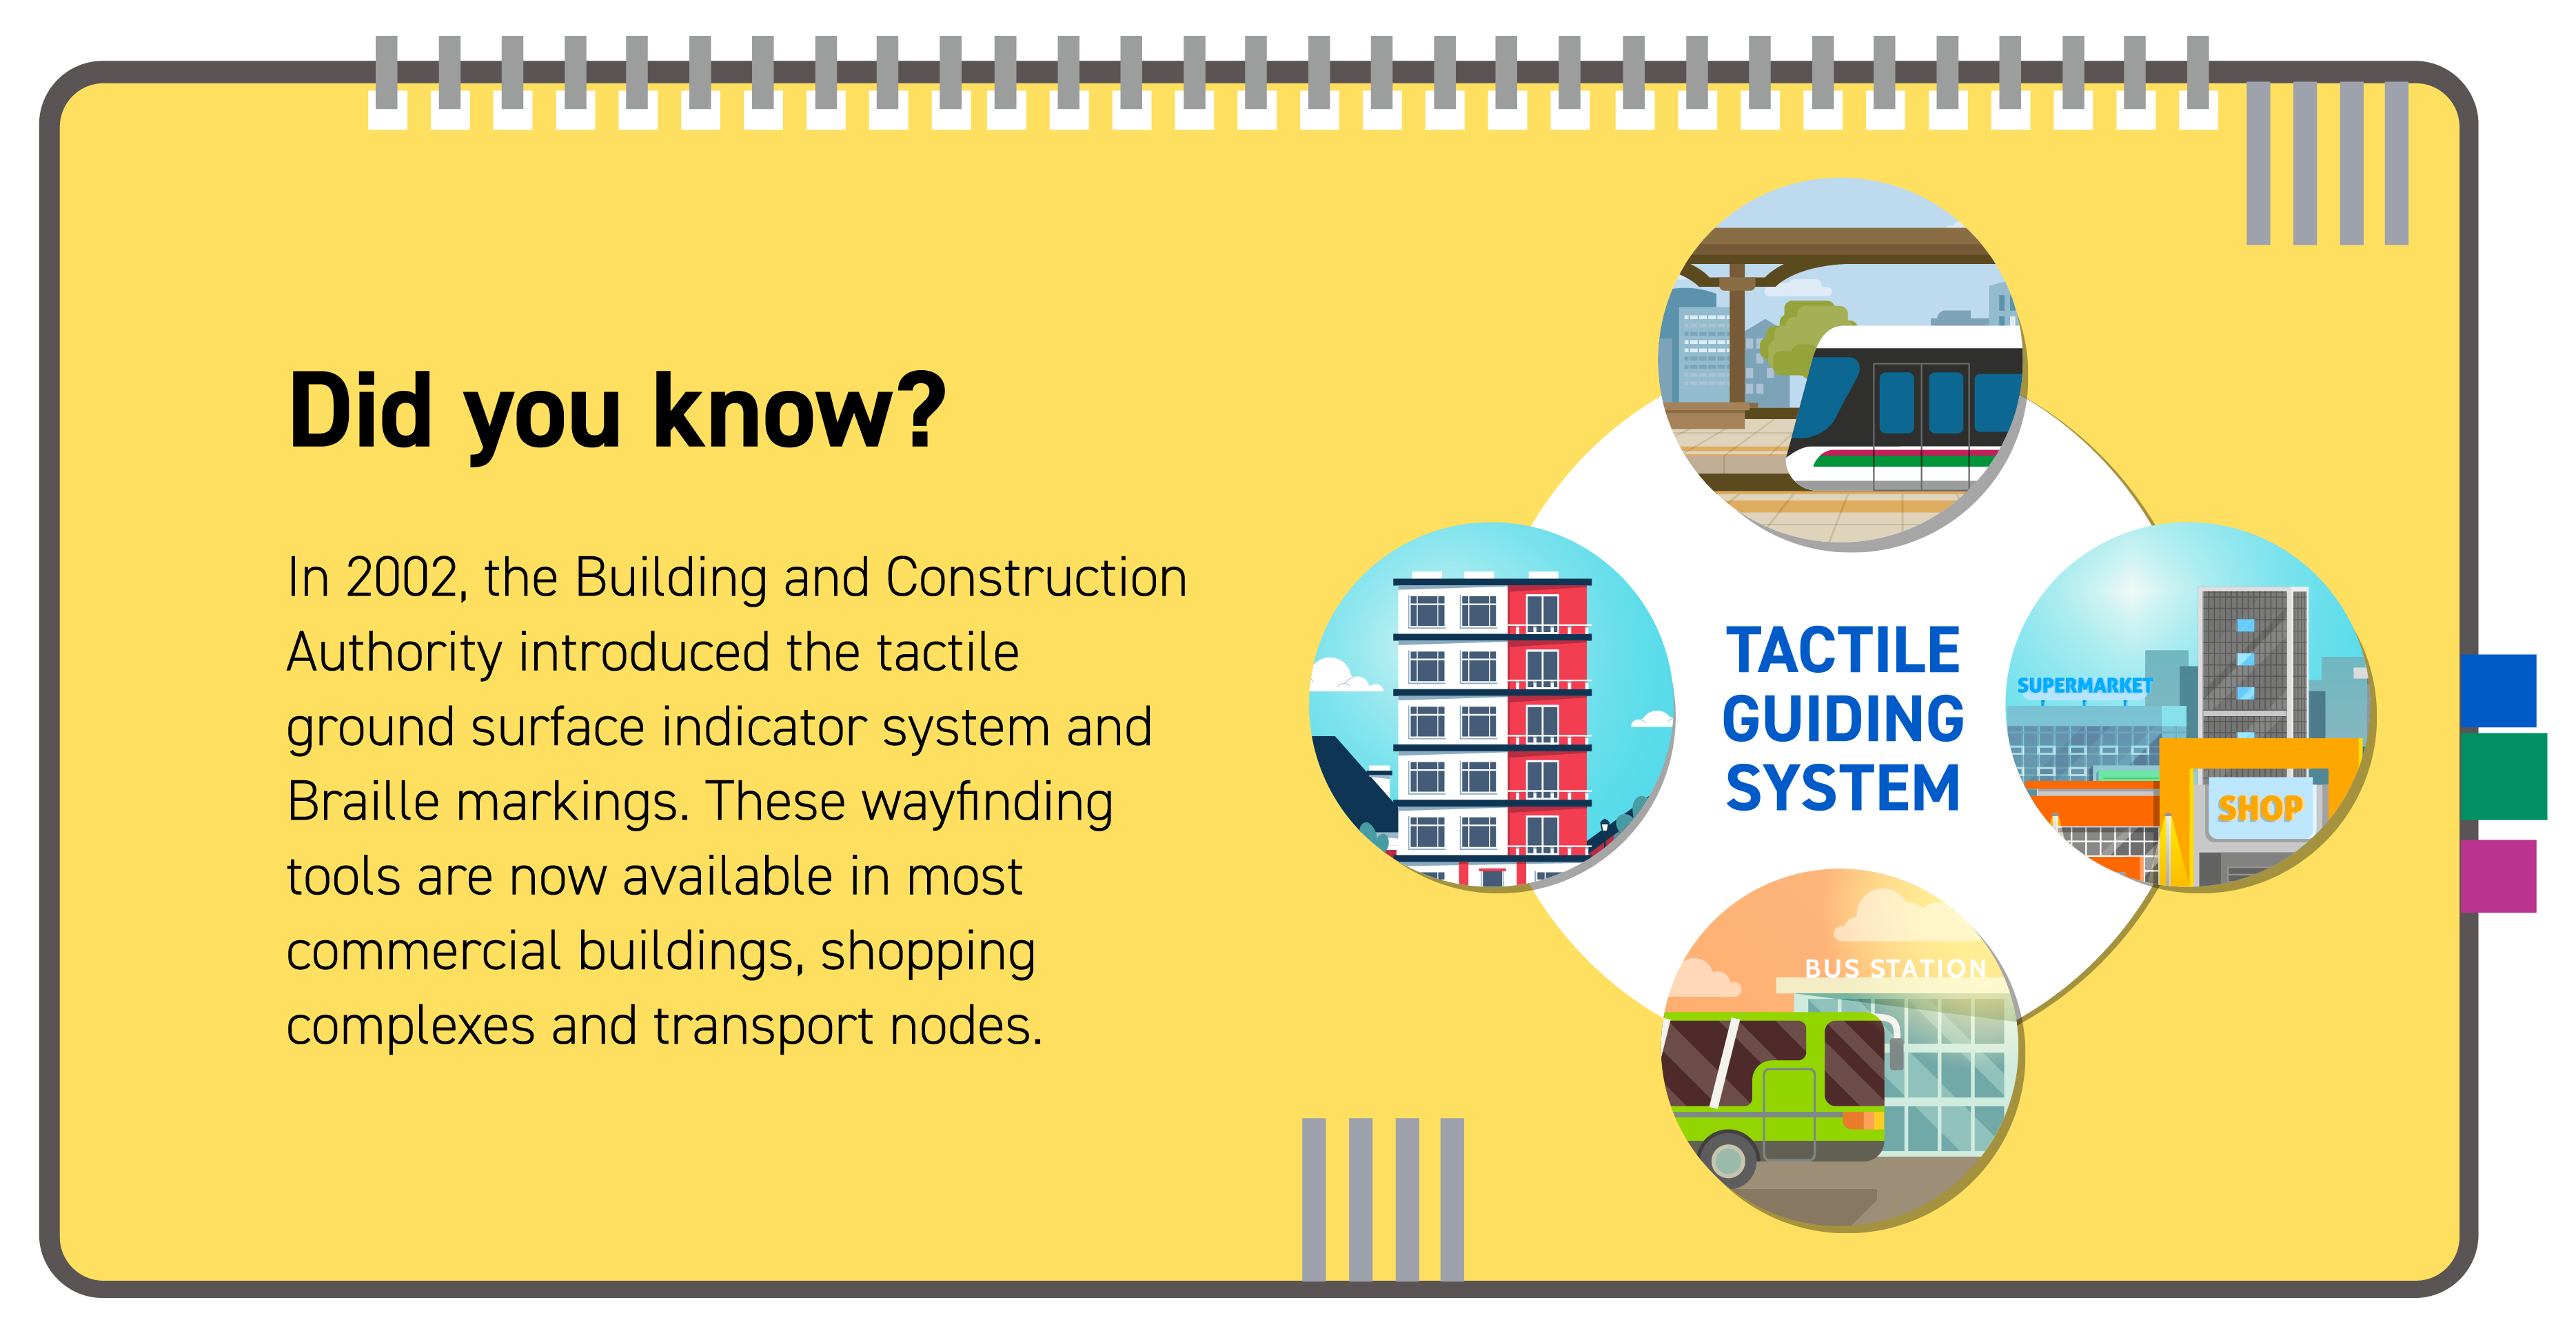 Did you know fact about the tactile guiding system on transport nodes